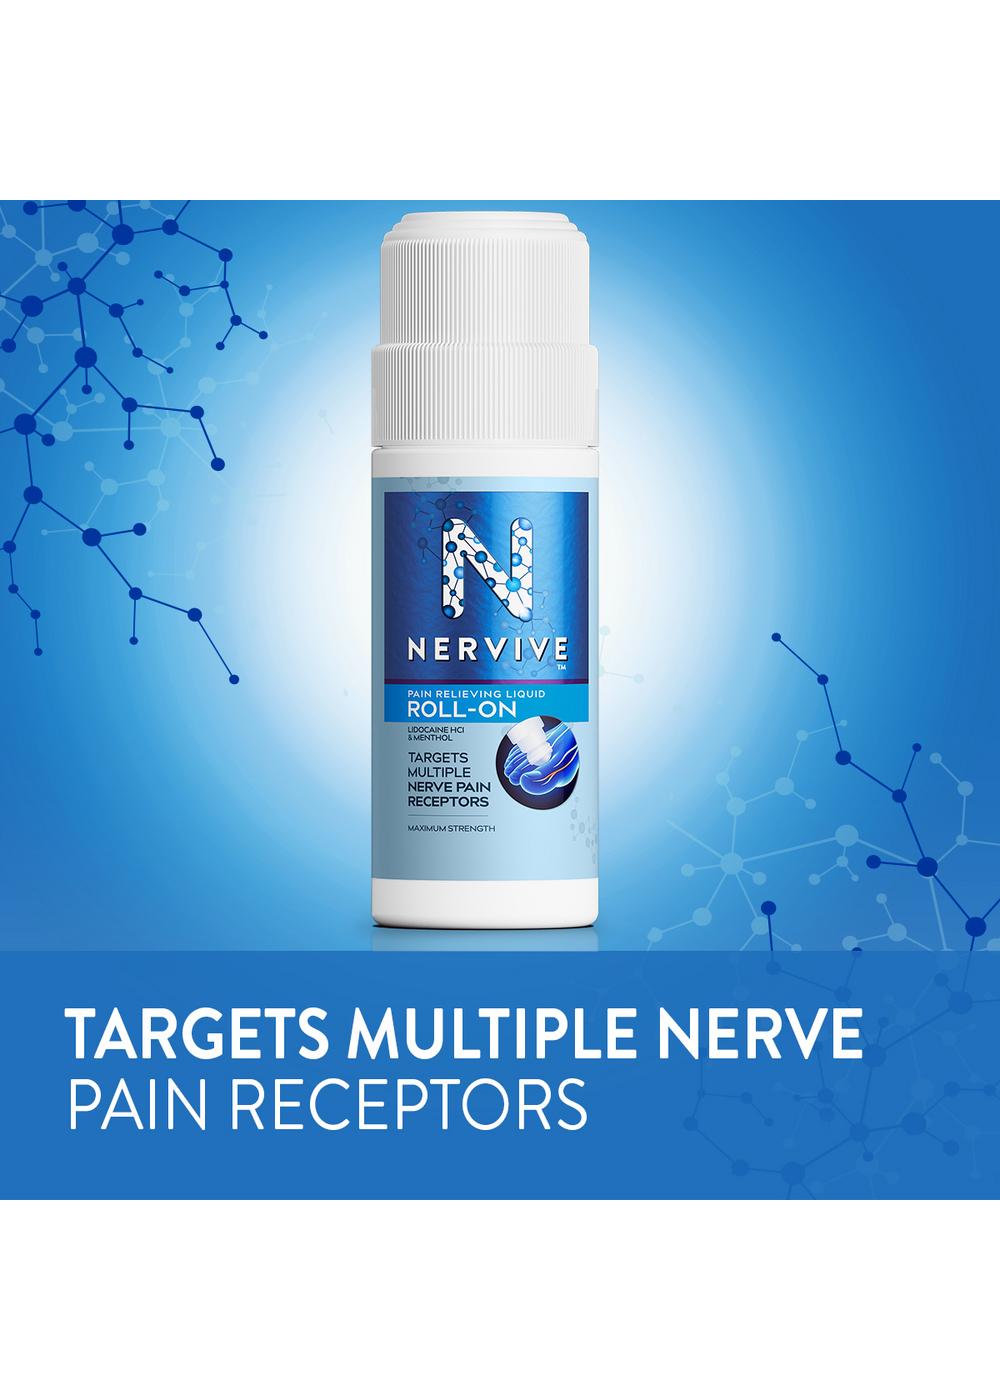 Nervive Max Strength Nerve Care Pain Relieving Roll-On Liquid; image 4 of 10